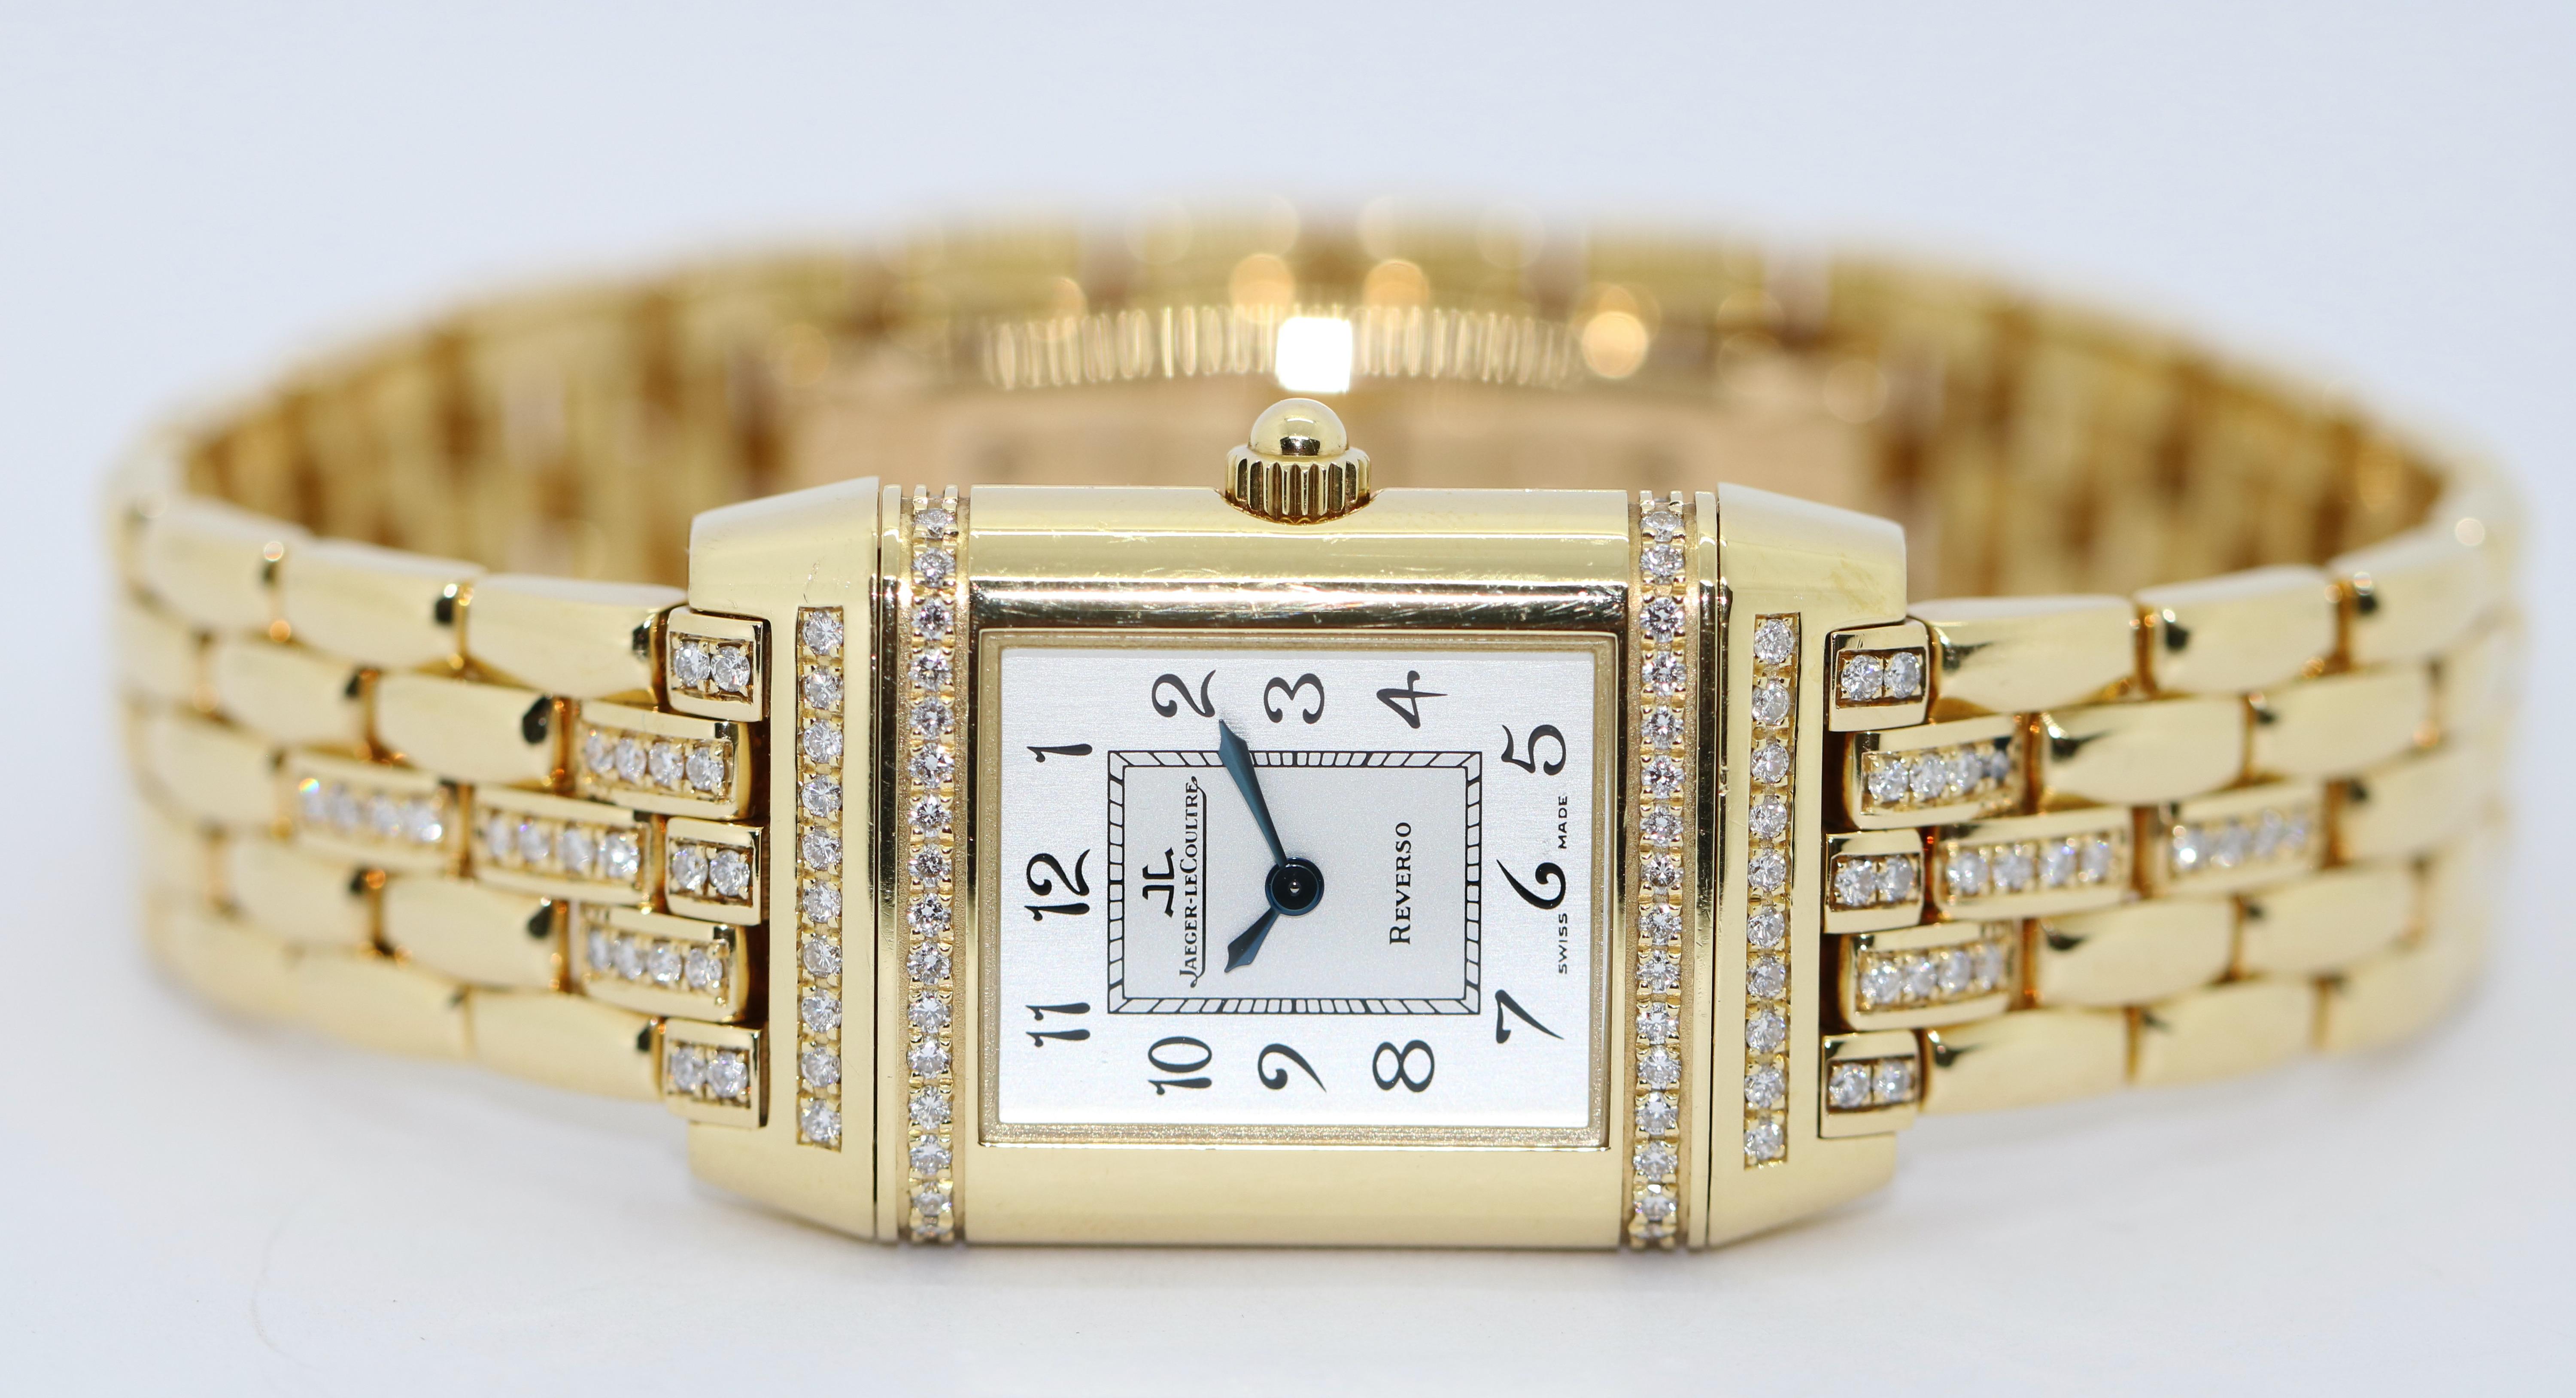 Fantastic JLC Reverso ladies wristwatch.
Strap and Case made of solid 18K Gold.
Strap and case (on both sides) set with original diamonds.

From first owner.
Quartz movement.

Dimension of case (without crown) 21mm x 33mm

Including certificate of